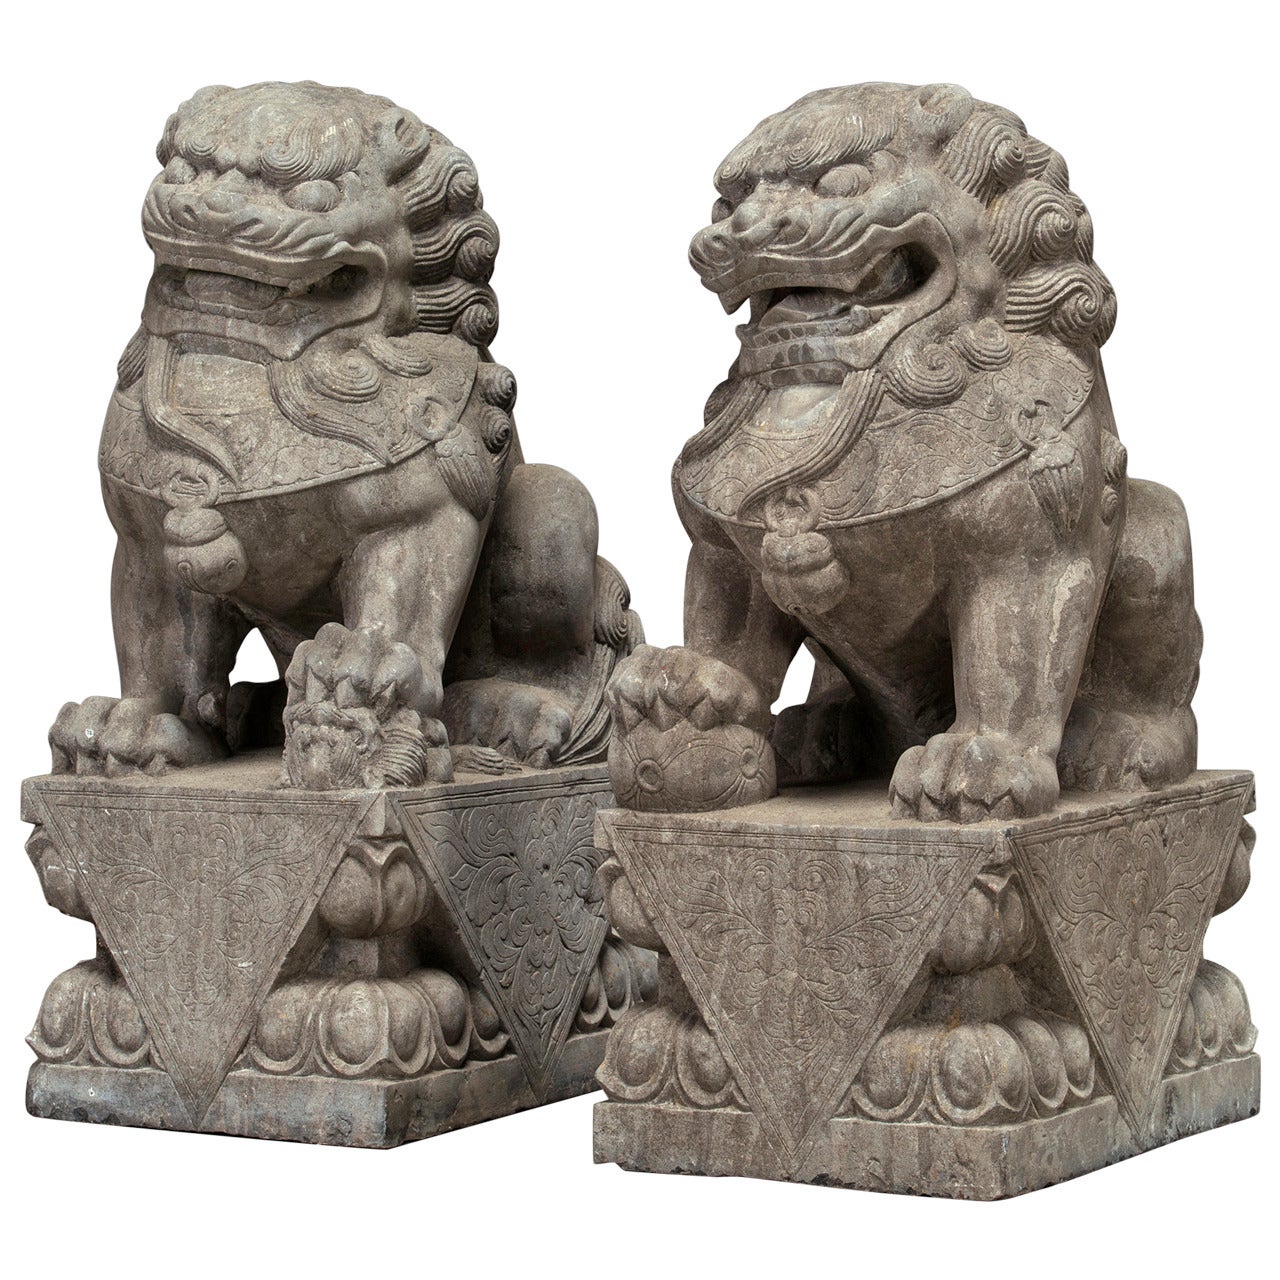 Pair of Large Stone Lions, 18th-19th Century